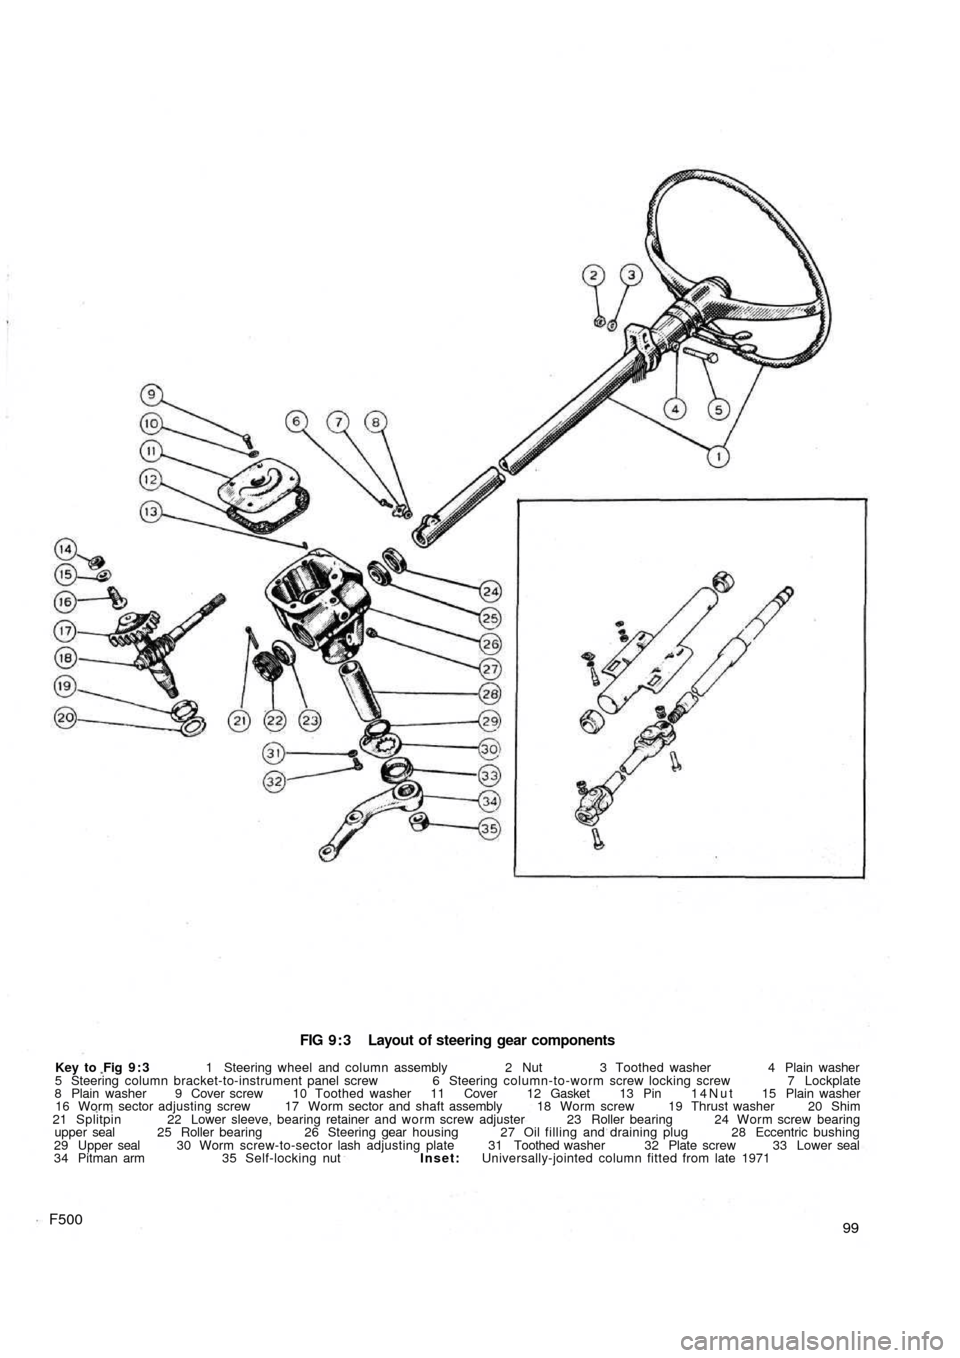 FIAT 500 1959 1.G Workshop Manual FIG 9 : 3  Layout of steering gear components
Key to  Fig 9 : 3 1 Steering wheel and column assembly 2 Nut 3 Toothed washer 4 Plain washer
5 Steering column bracket-to-instrument panel screw 6 Steerin